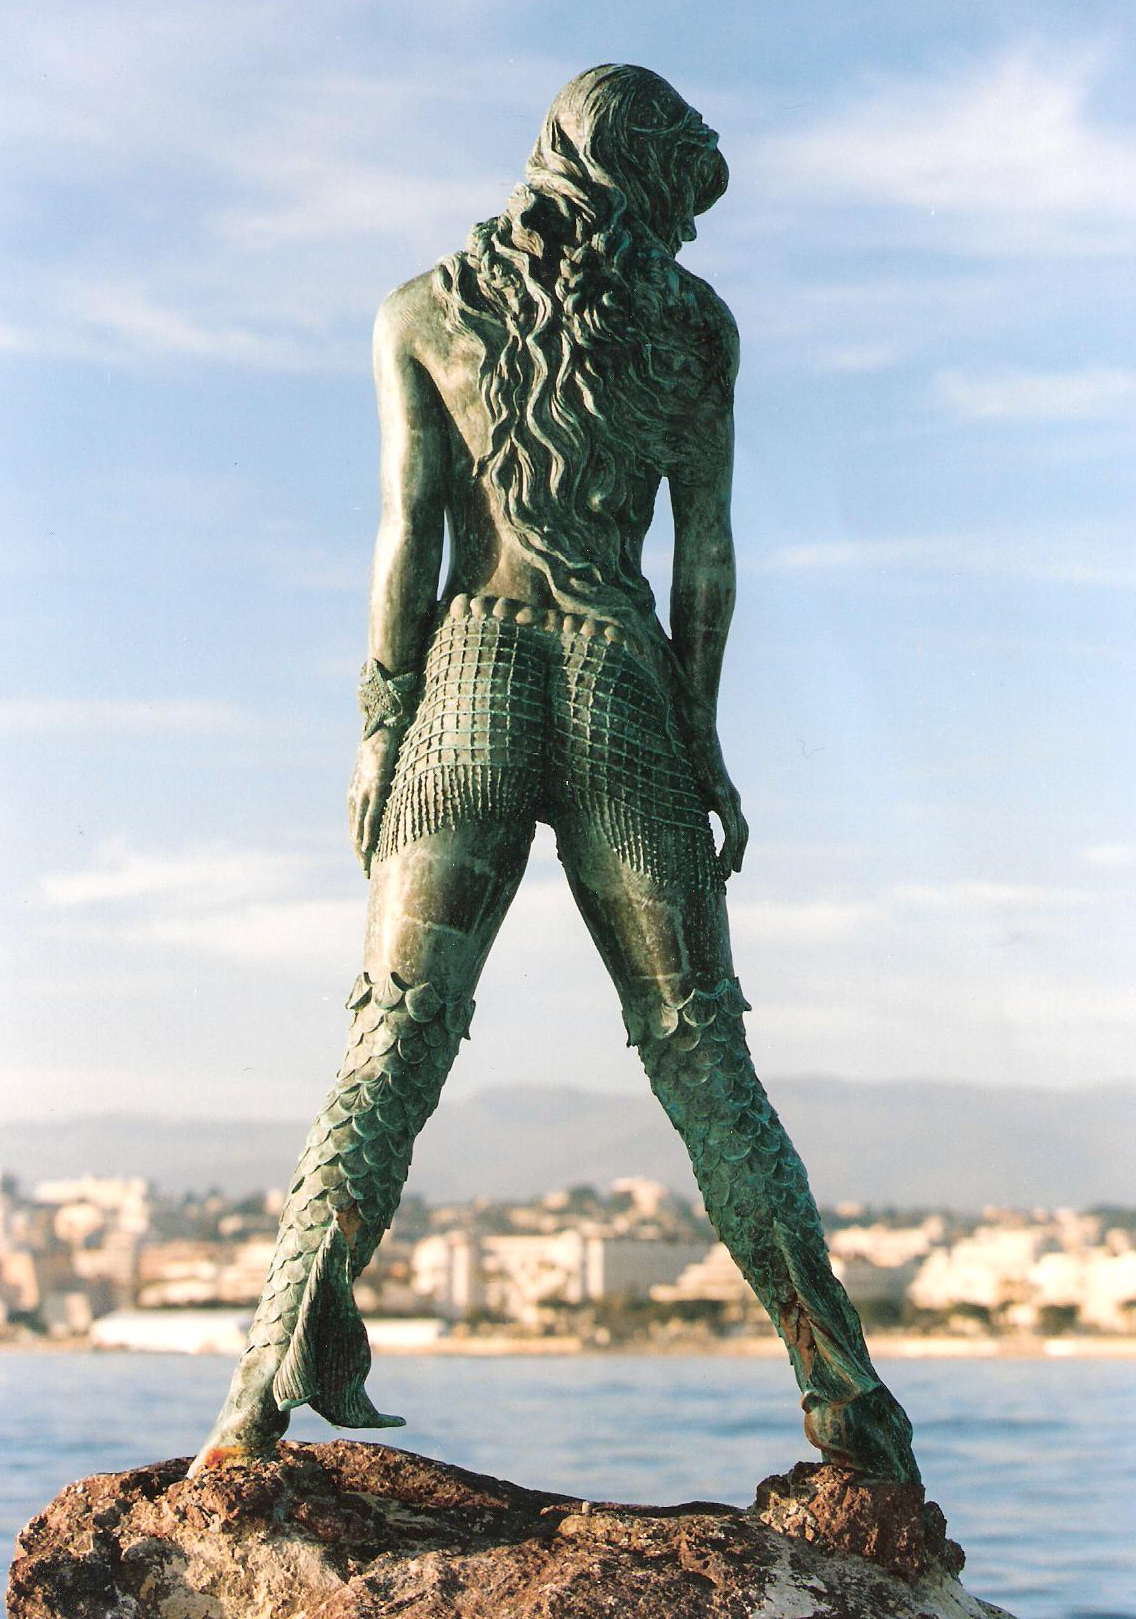 "Atlante", a Mermaid Statue at the Turn of the Millennium - Mermaids of